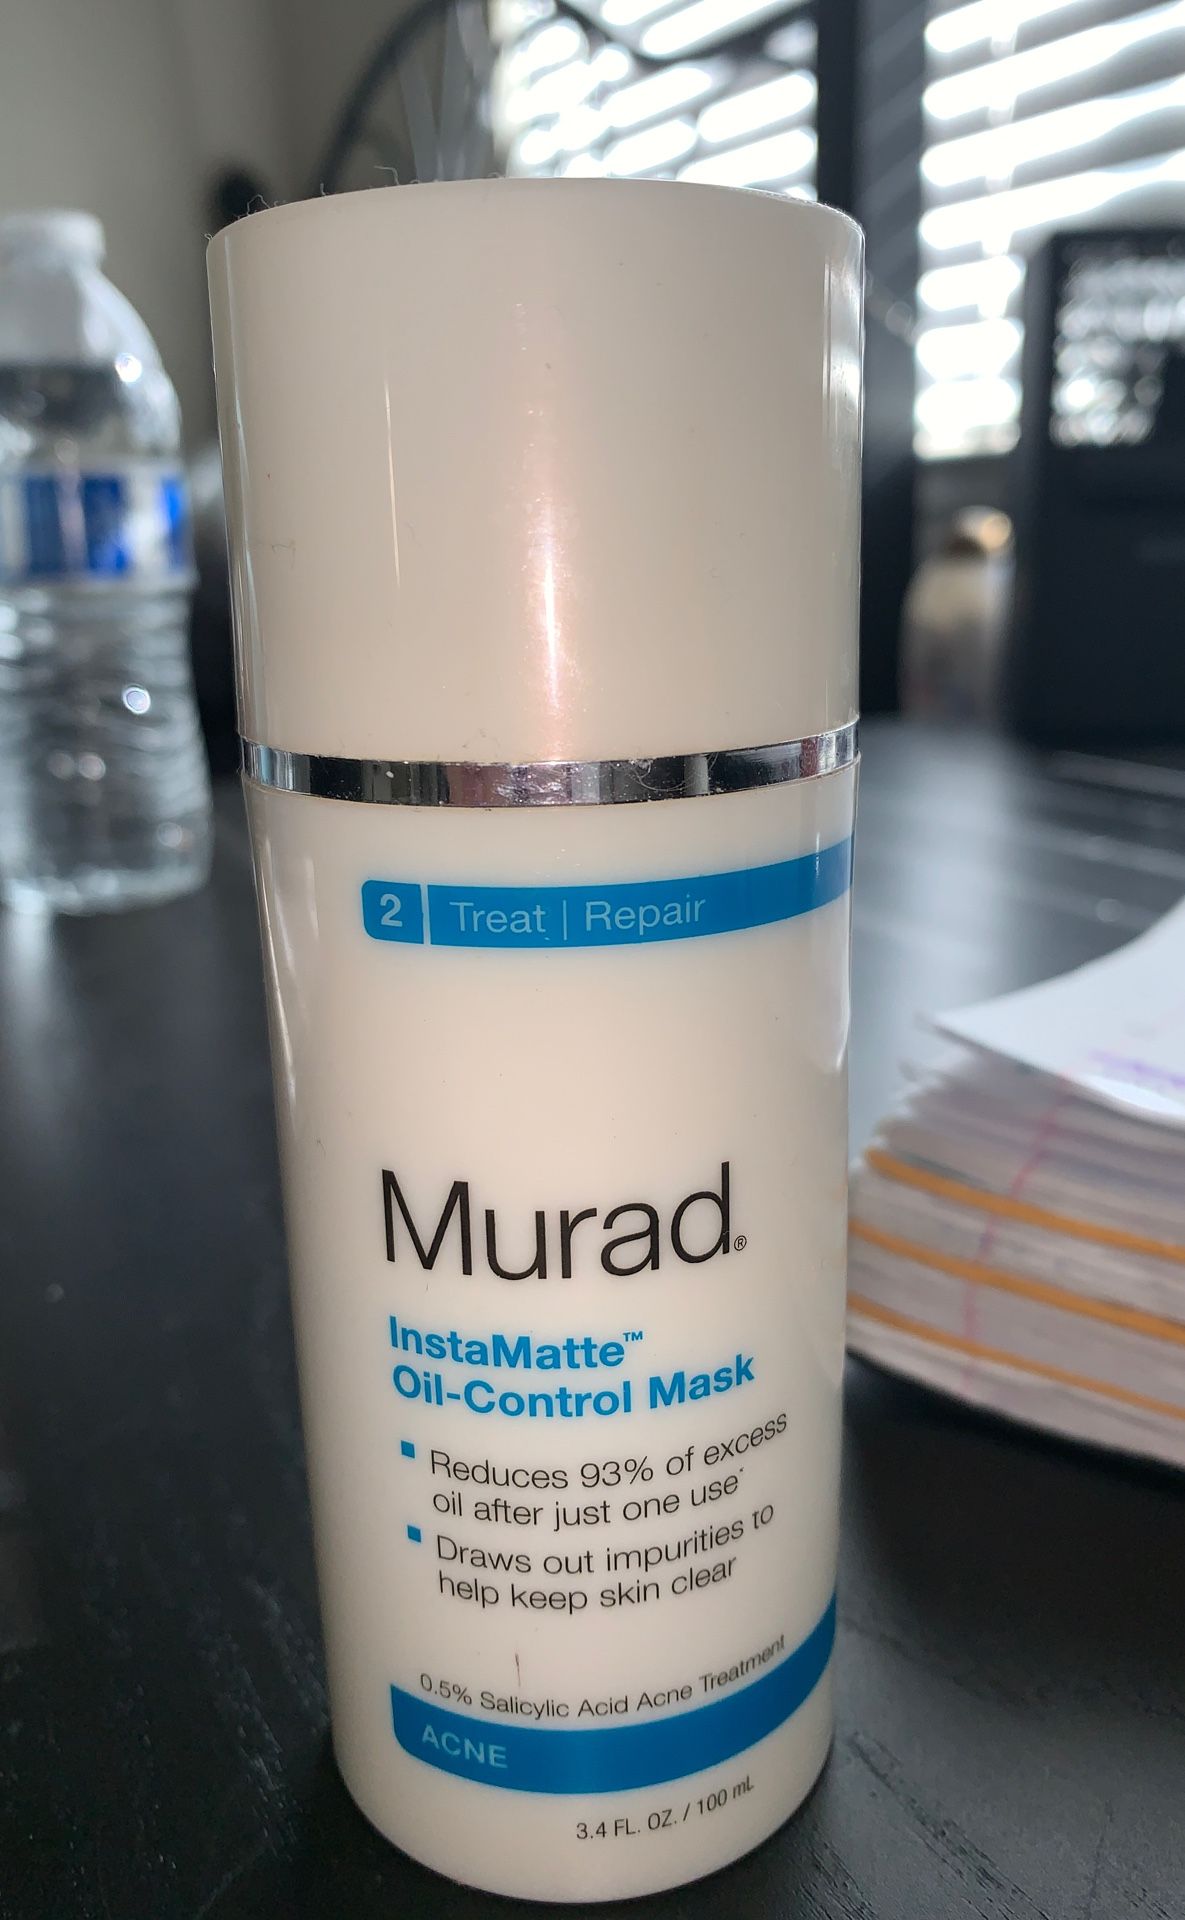 Mural Oil Control Mask/Face wash